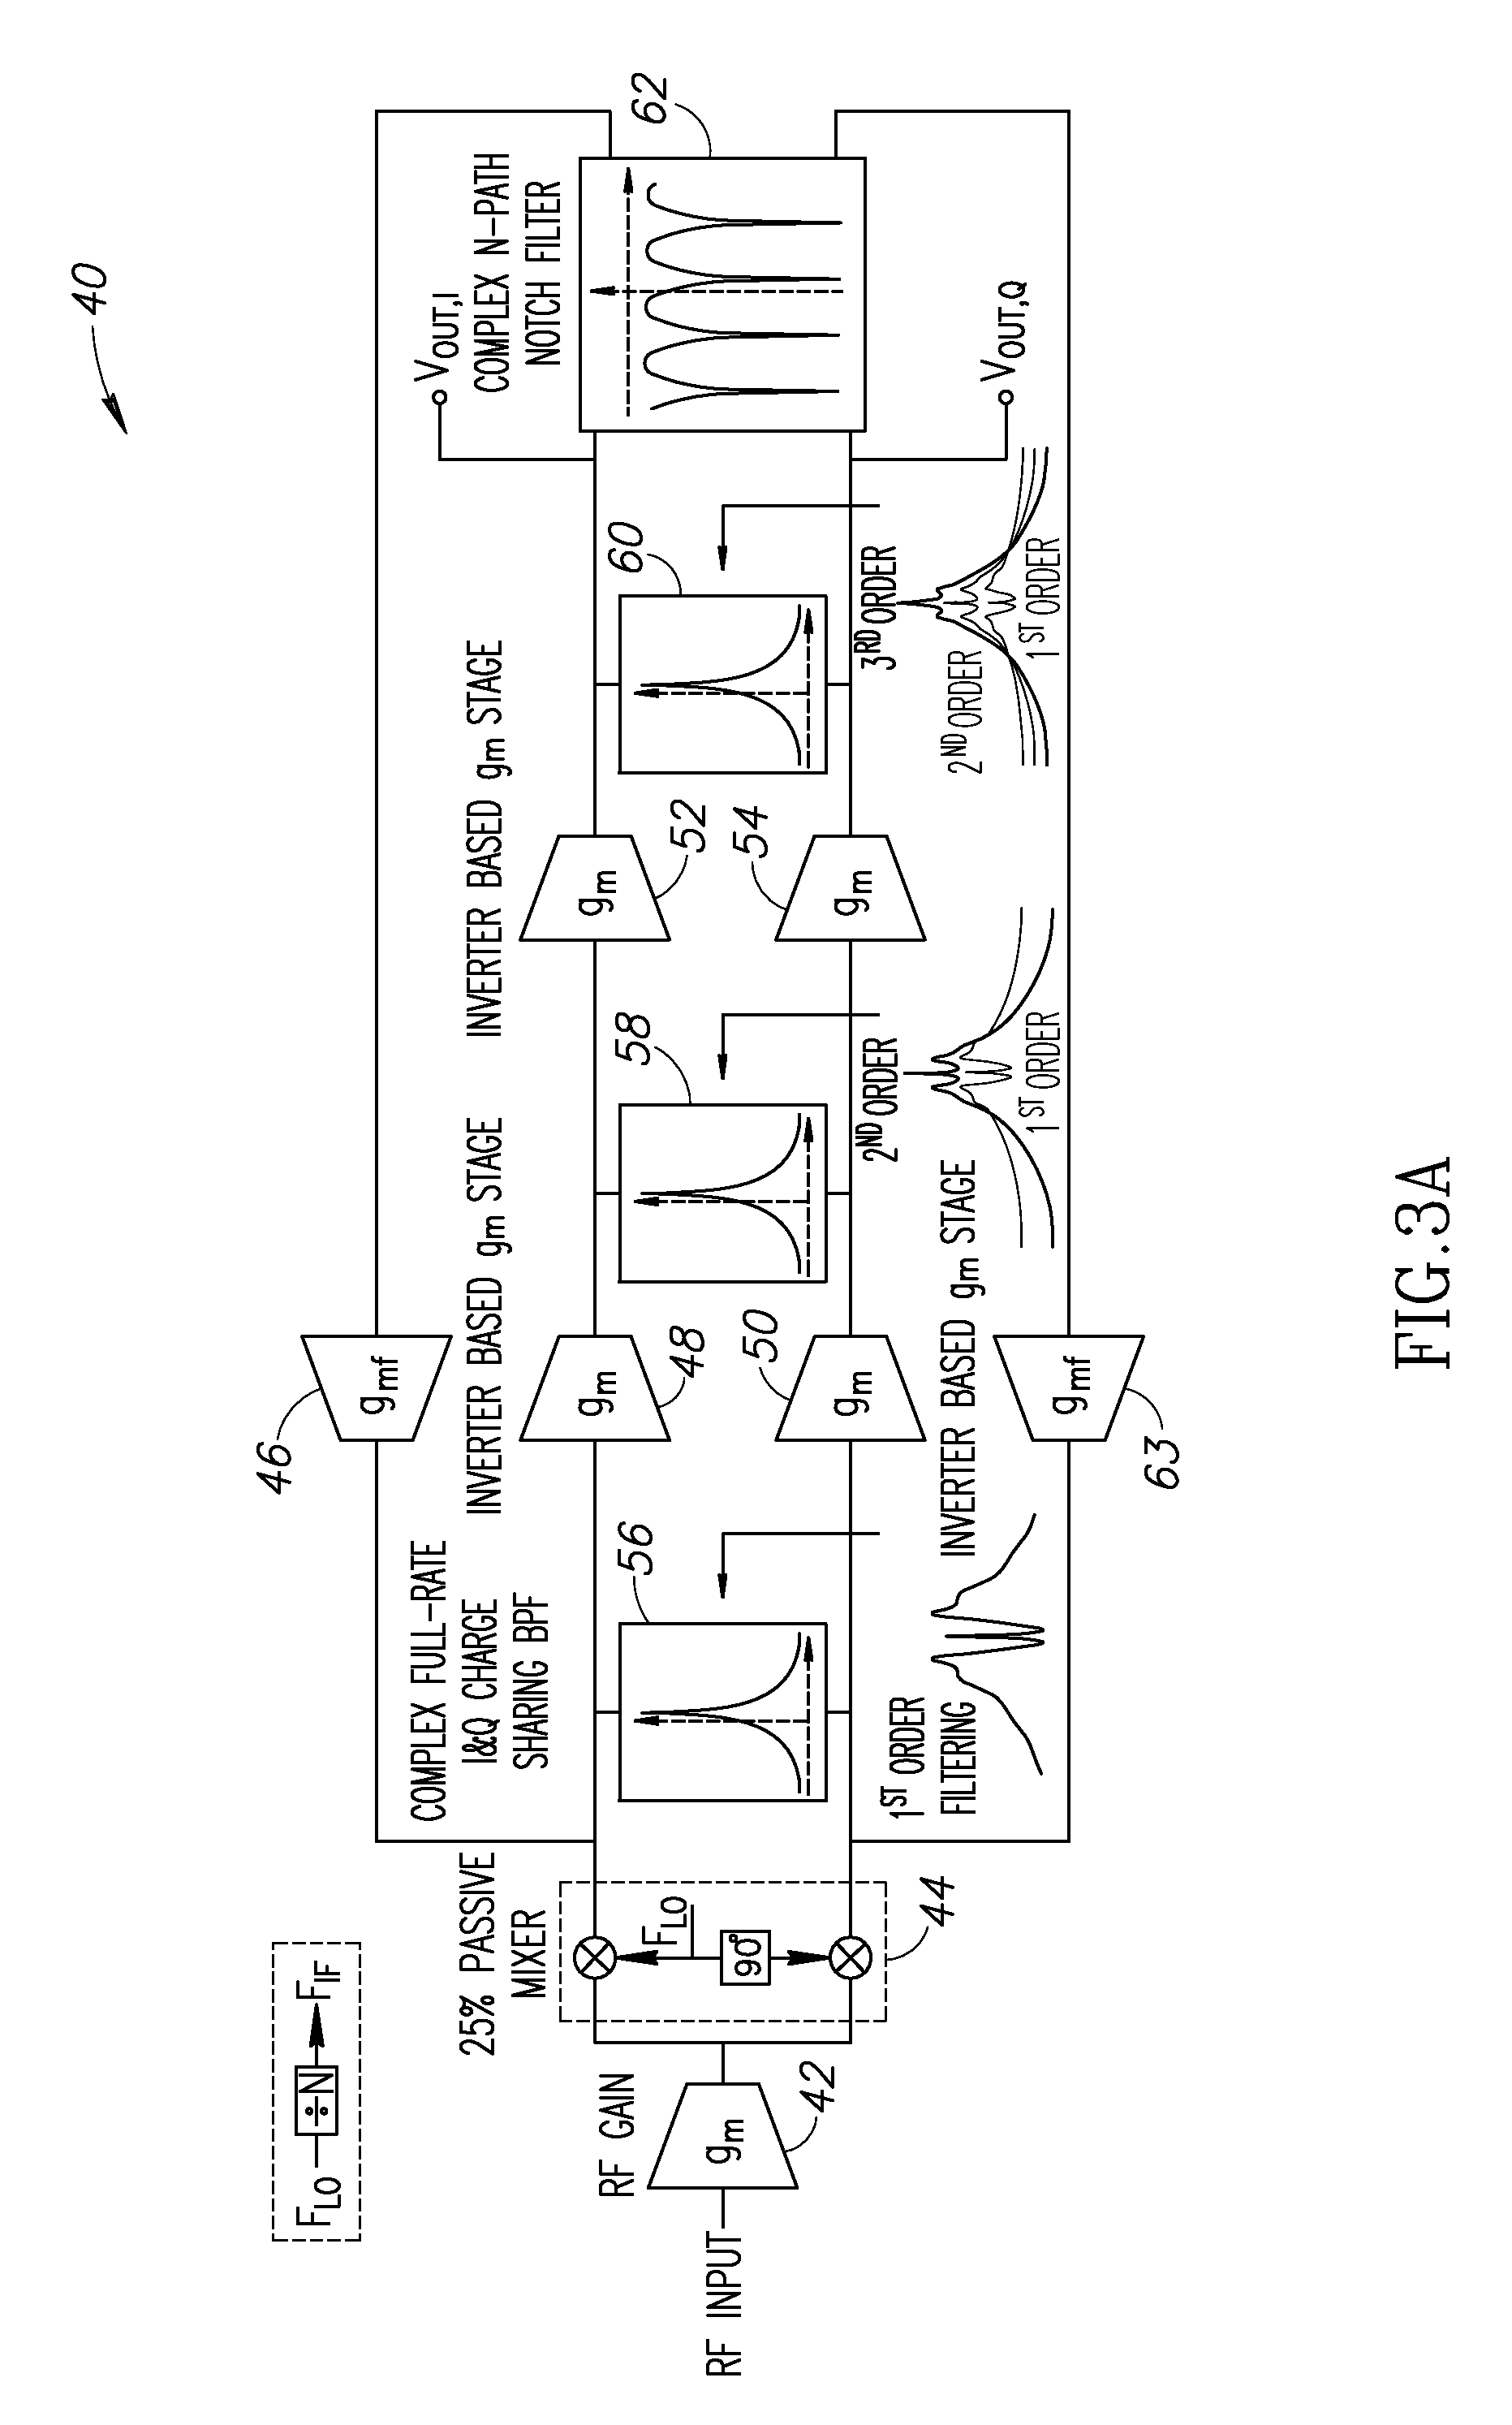 High-if superheterodyne receiver incorporating high-q complex band pass filter